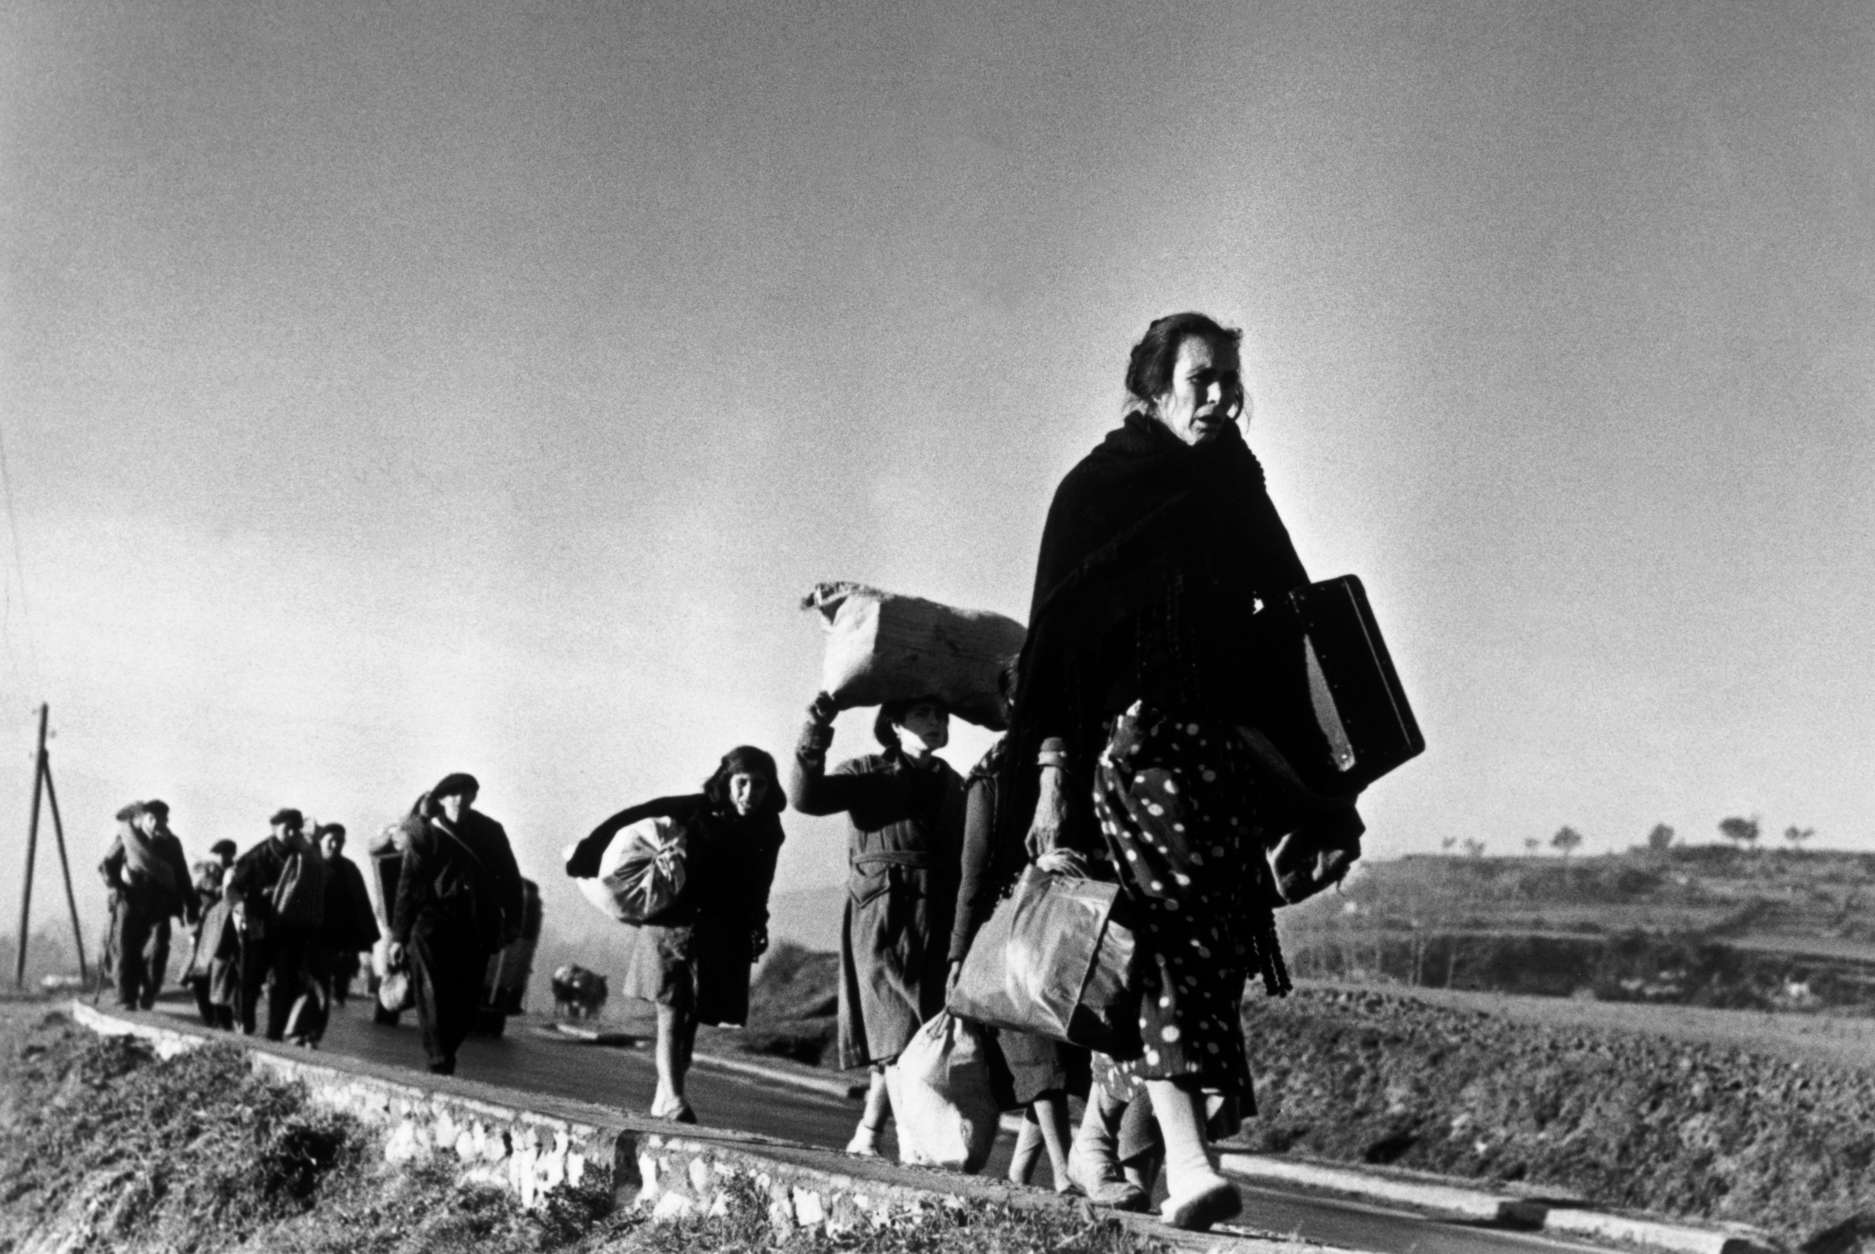 Line of refugees with their belongings on the road from Barcelona to the French border], January 25, 1939
©International Center of Photography/Magnum Photos  
